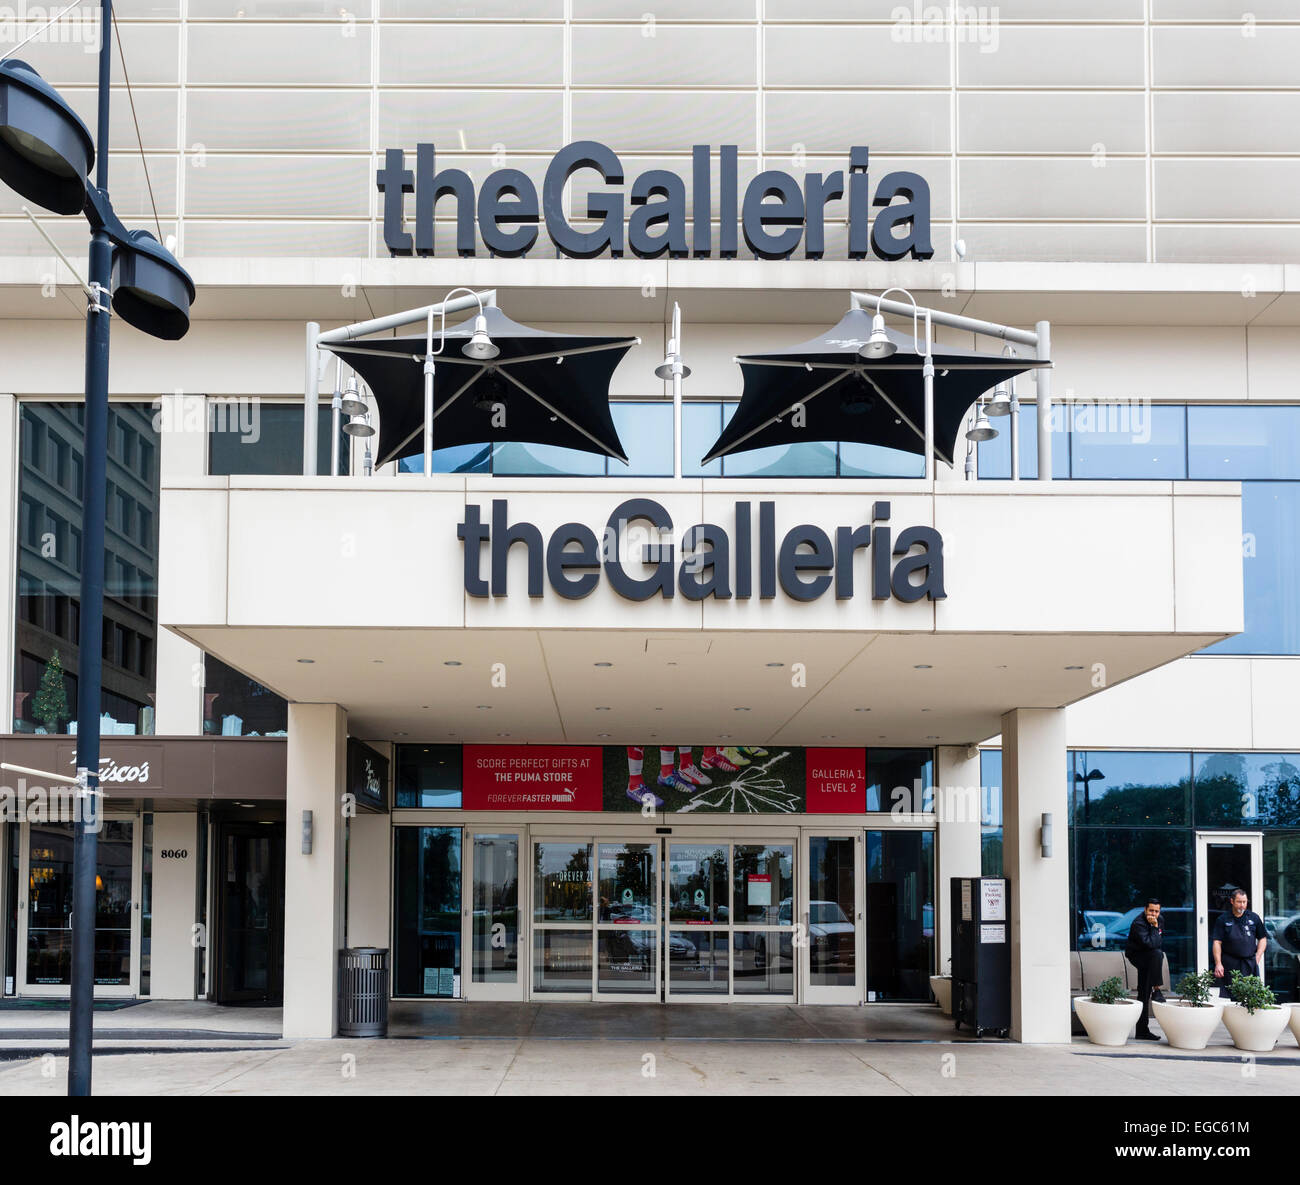 Welcome To The Galleria - A Shopping Center In Houston, TX - A